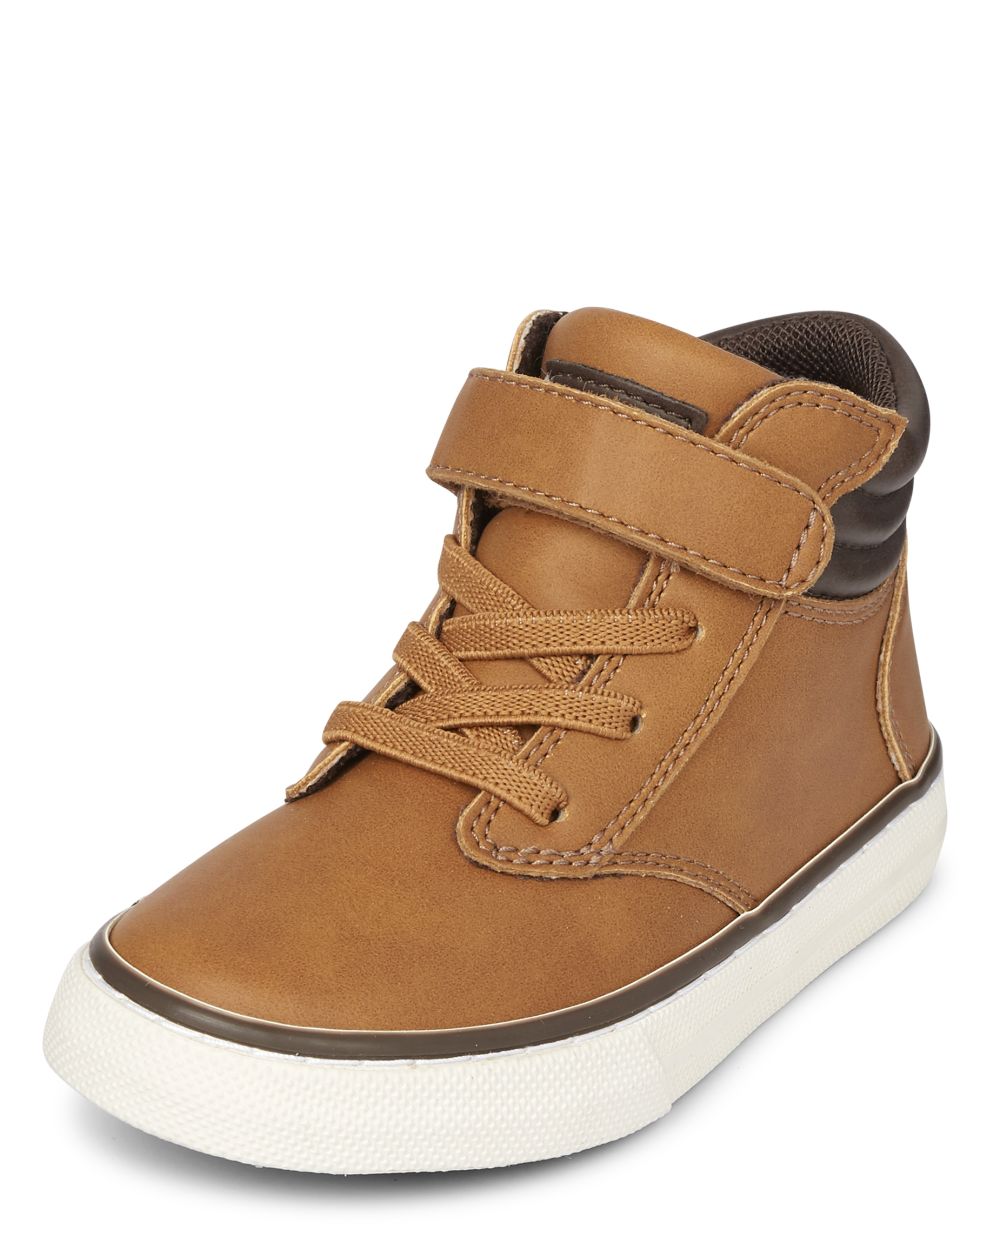 

Baby Boys Toddler Boys Hi Top Sneakers - Tan - The Children's Place